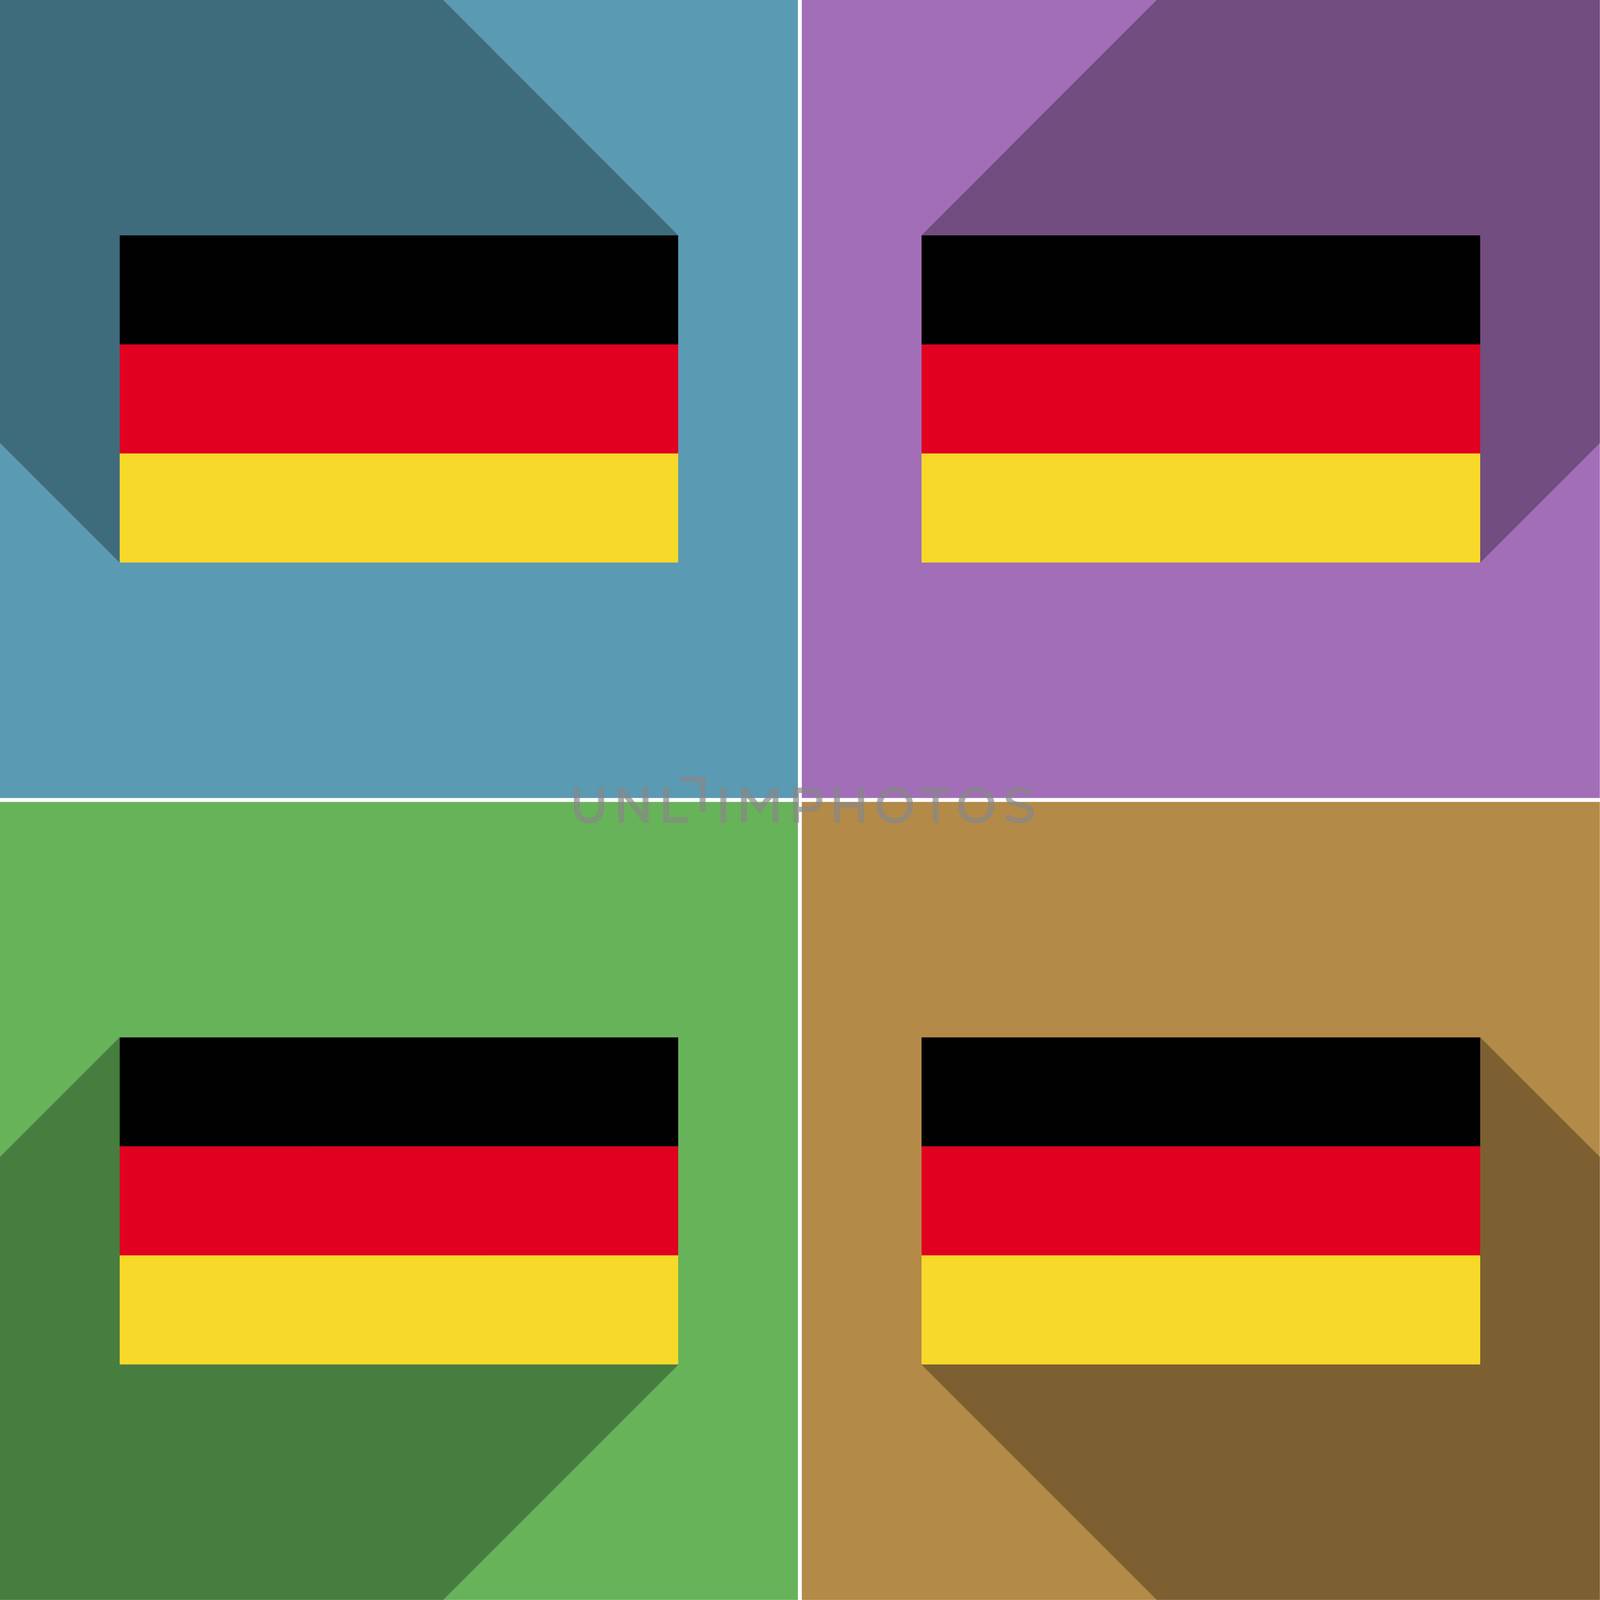 Flags of Germany. Set of colors flat design and long shadows.  illustration